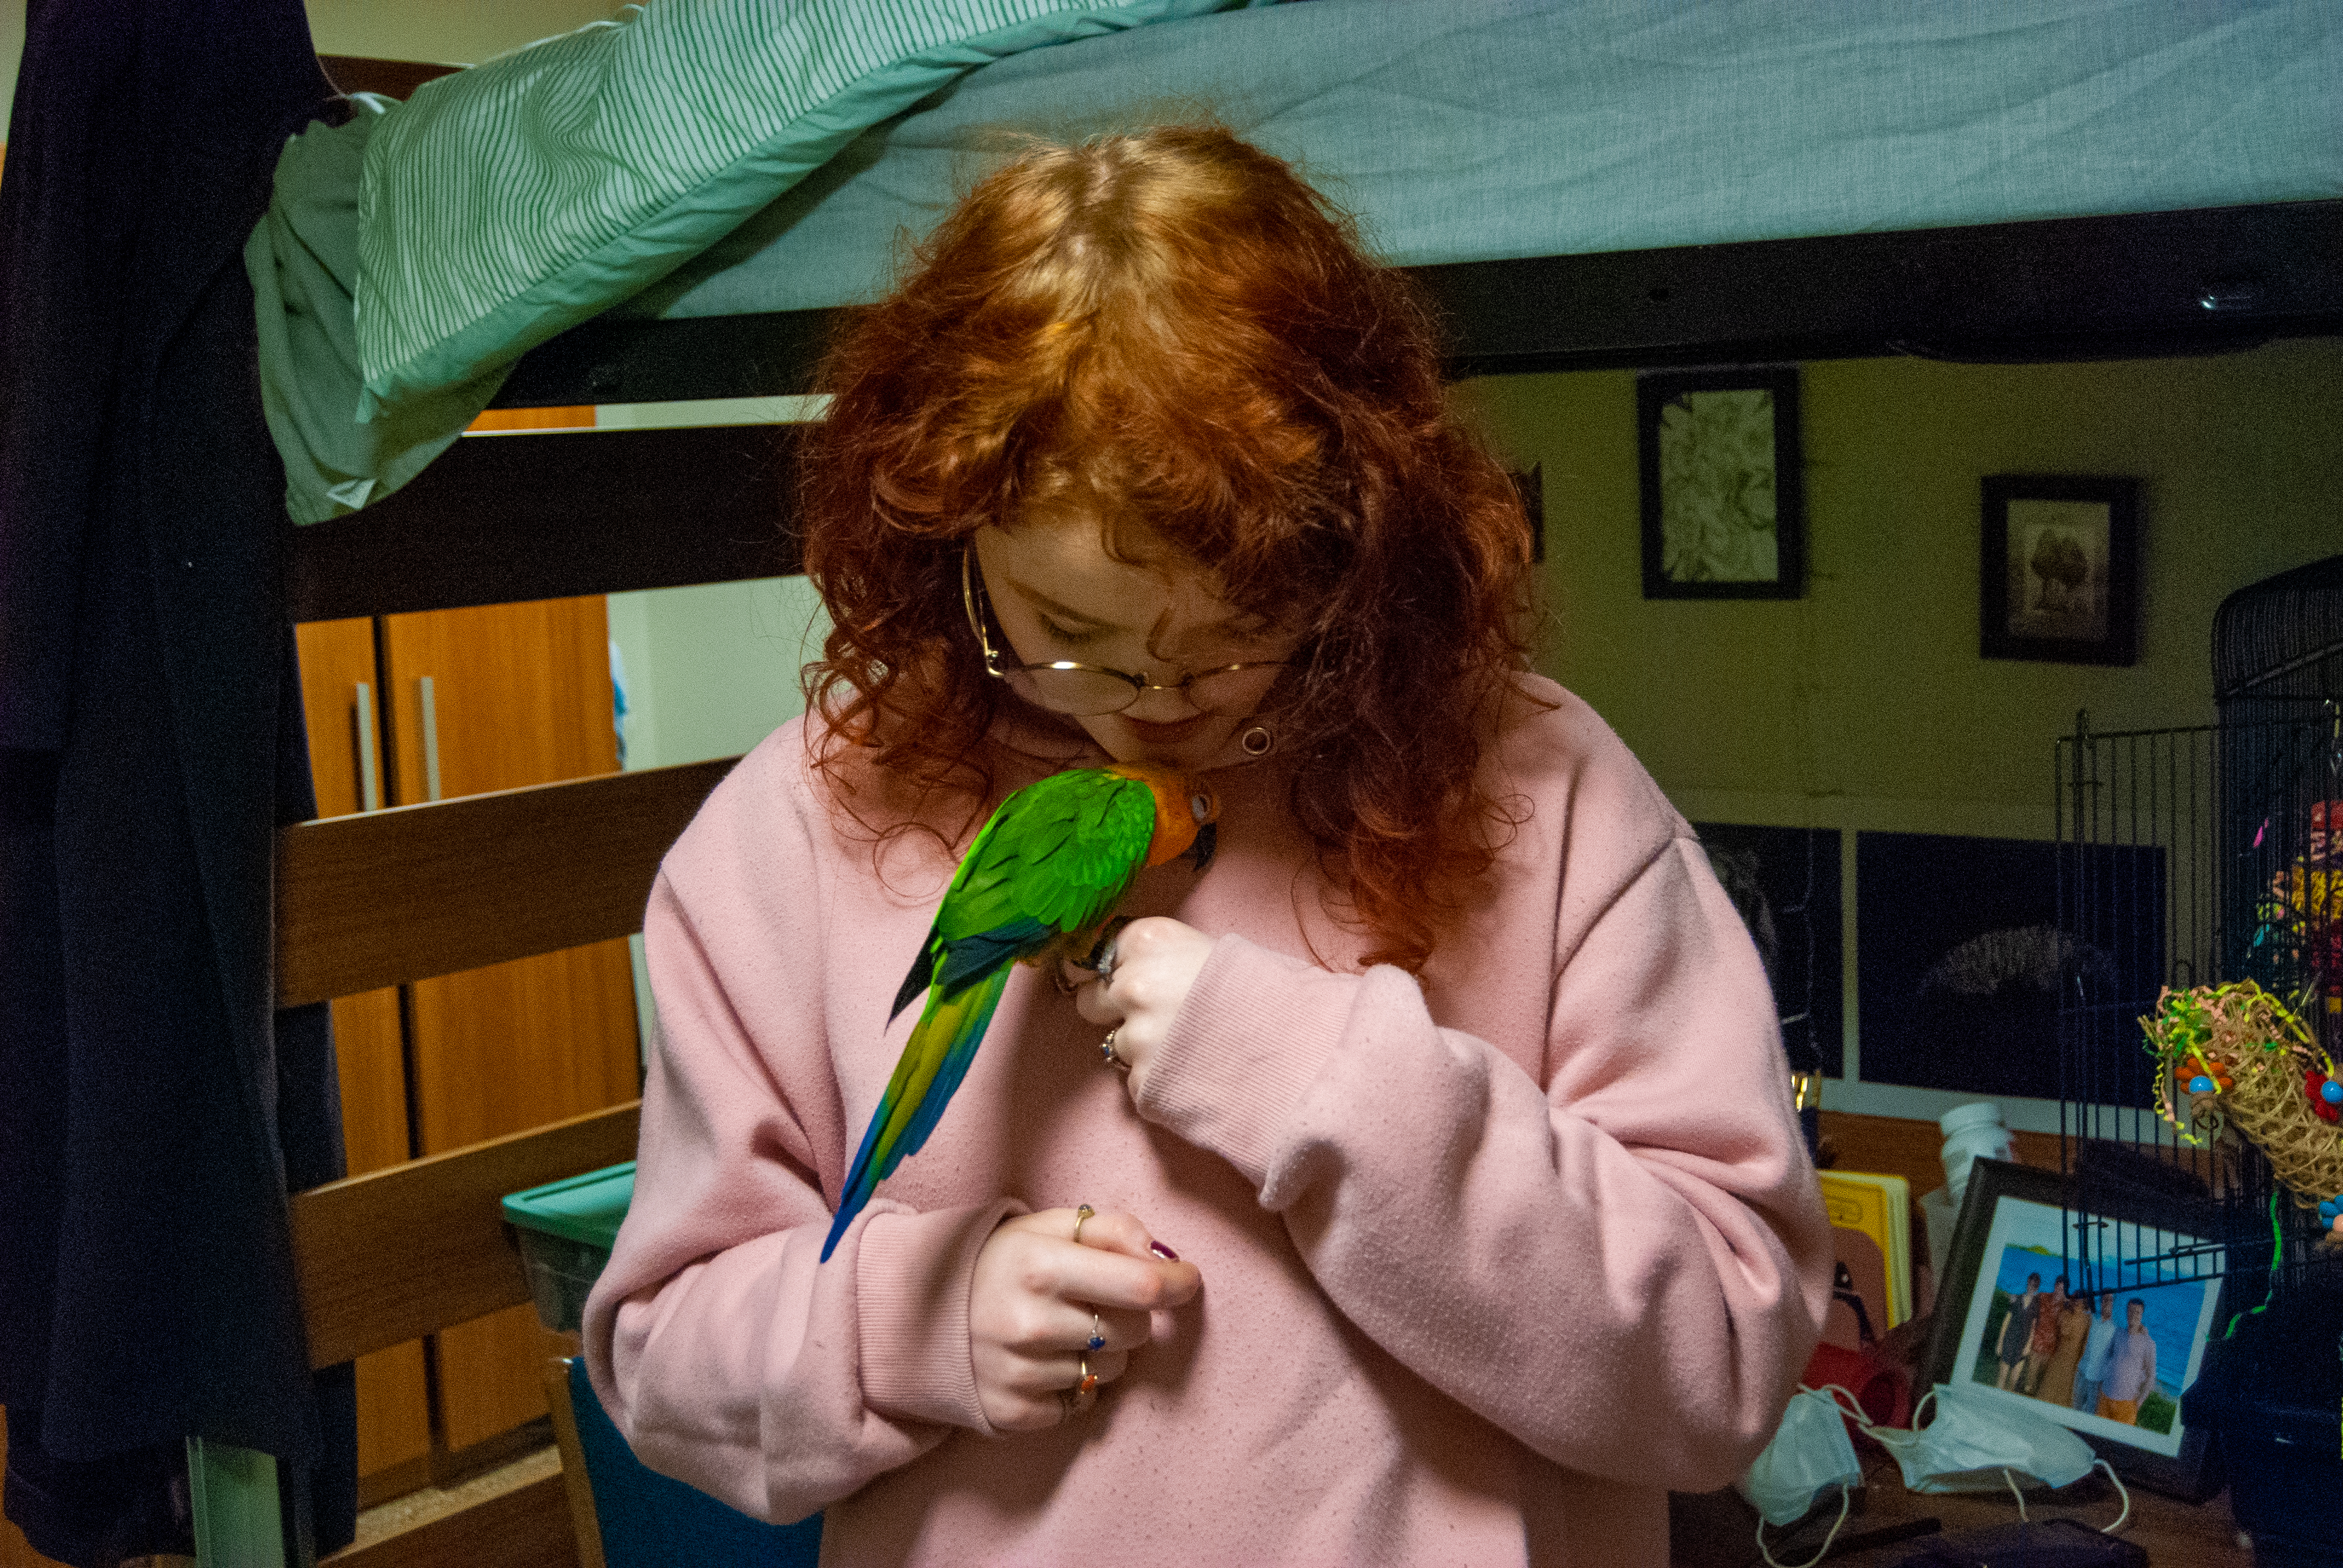 In front of her loft bed, Wade holds Ollie on her finger. Ollie has a yellow head, green body, and a blue and yellow tail